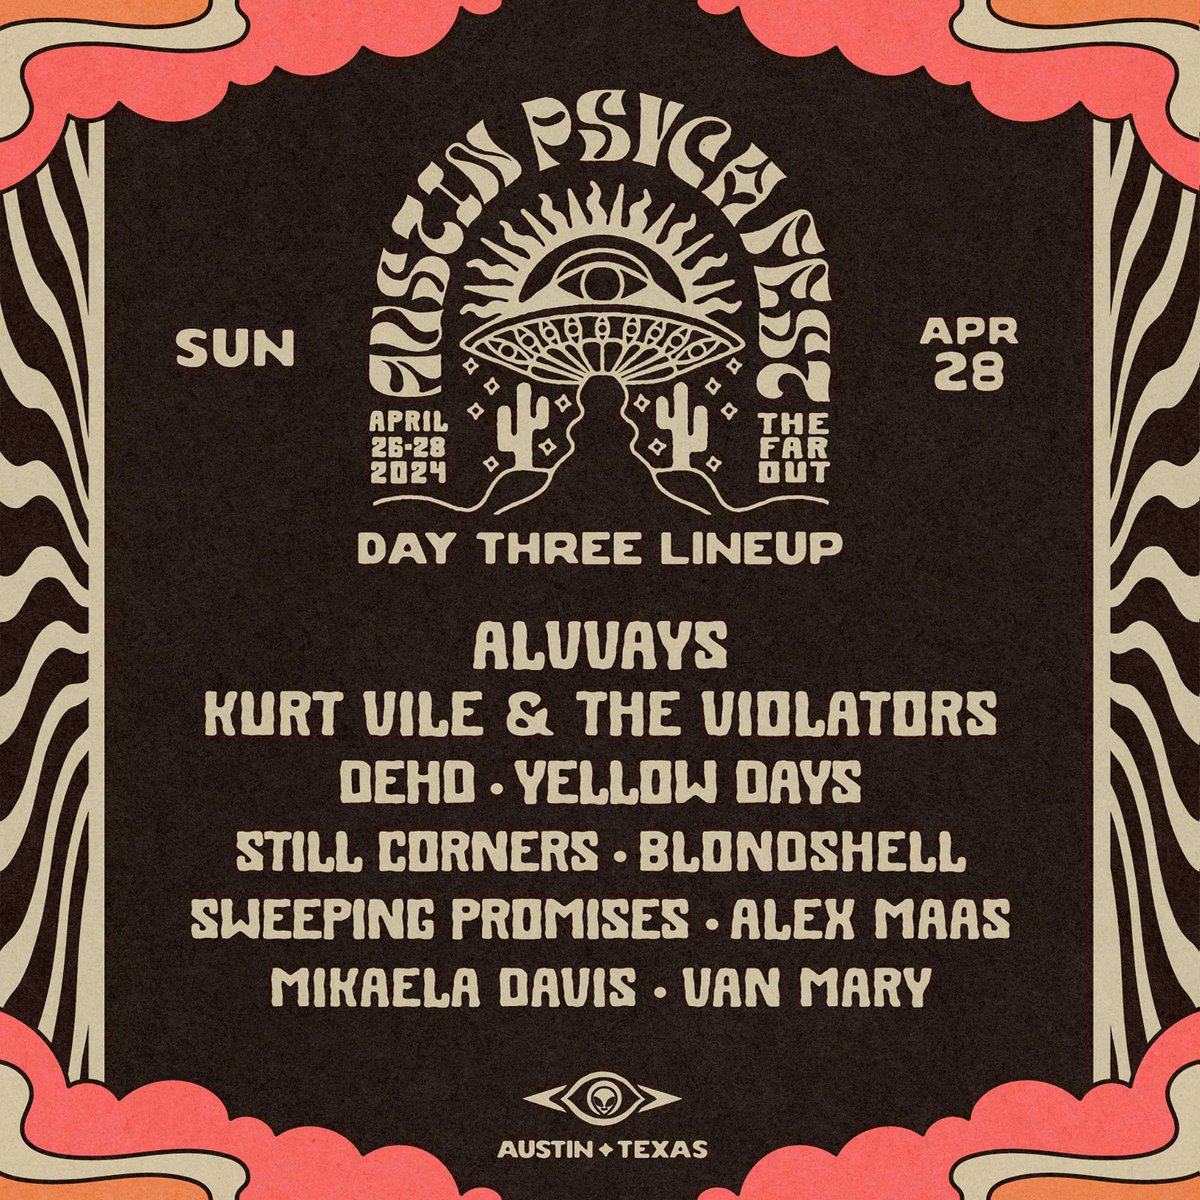 Set times have been released for AUSTIN PSYCH FEST! levitation.fm/apf/ We've also announced the late night shows FRI SAT and SUN at The 13th Floor - tickets for the festival + the Thursday Kick Off parties and Night Shows are available at: bit.ly/APF24